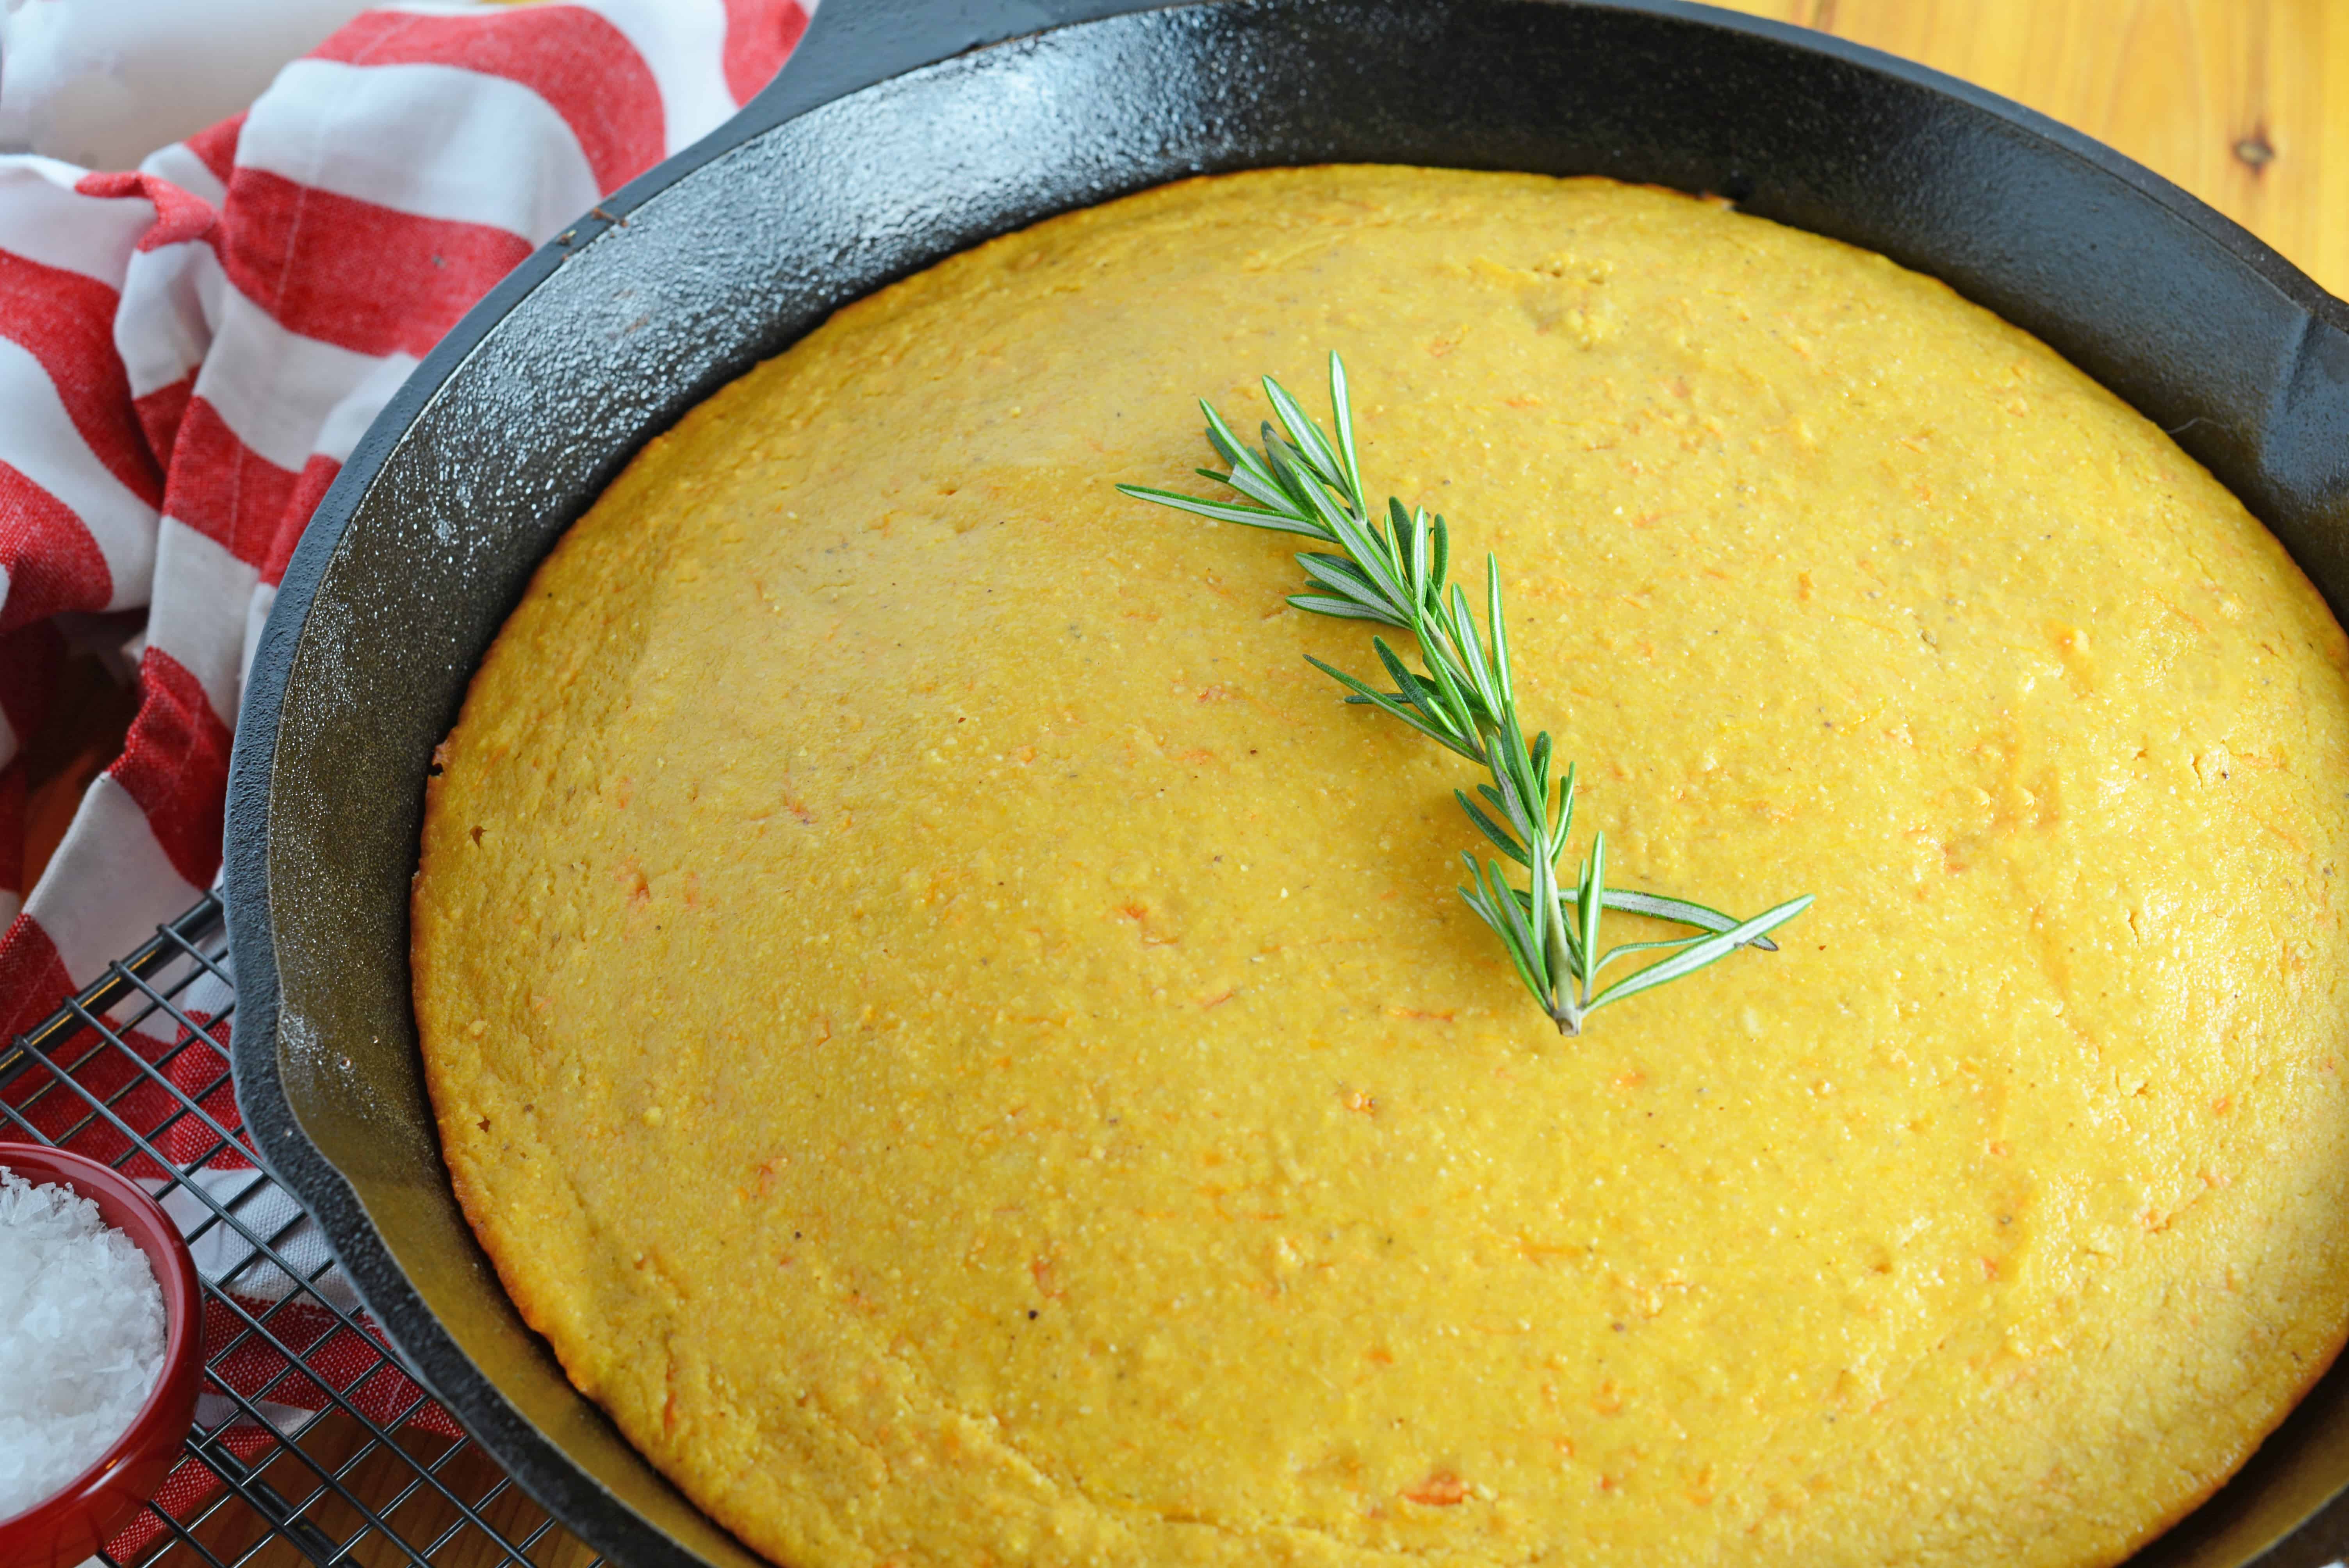 Sweet Potato Cornbread is a combination of two of my favorite fall foods: sweet potatoes and cornbread. Serve with your favorite chili or fried chicken! #sweetpotatocornbread #sweetcornbread www.savoryexperiments.com